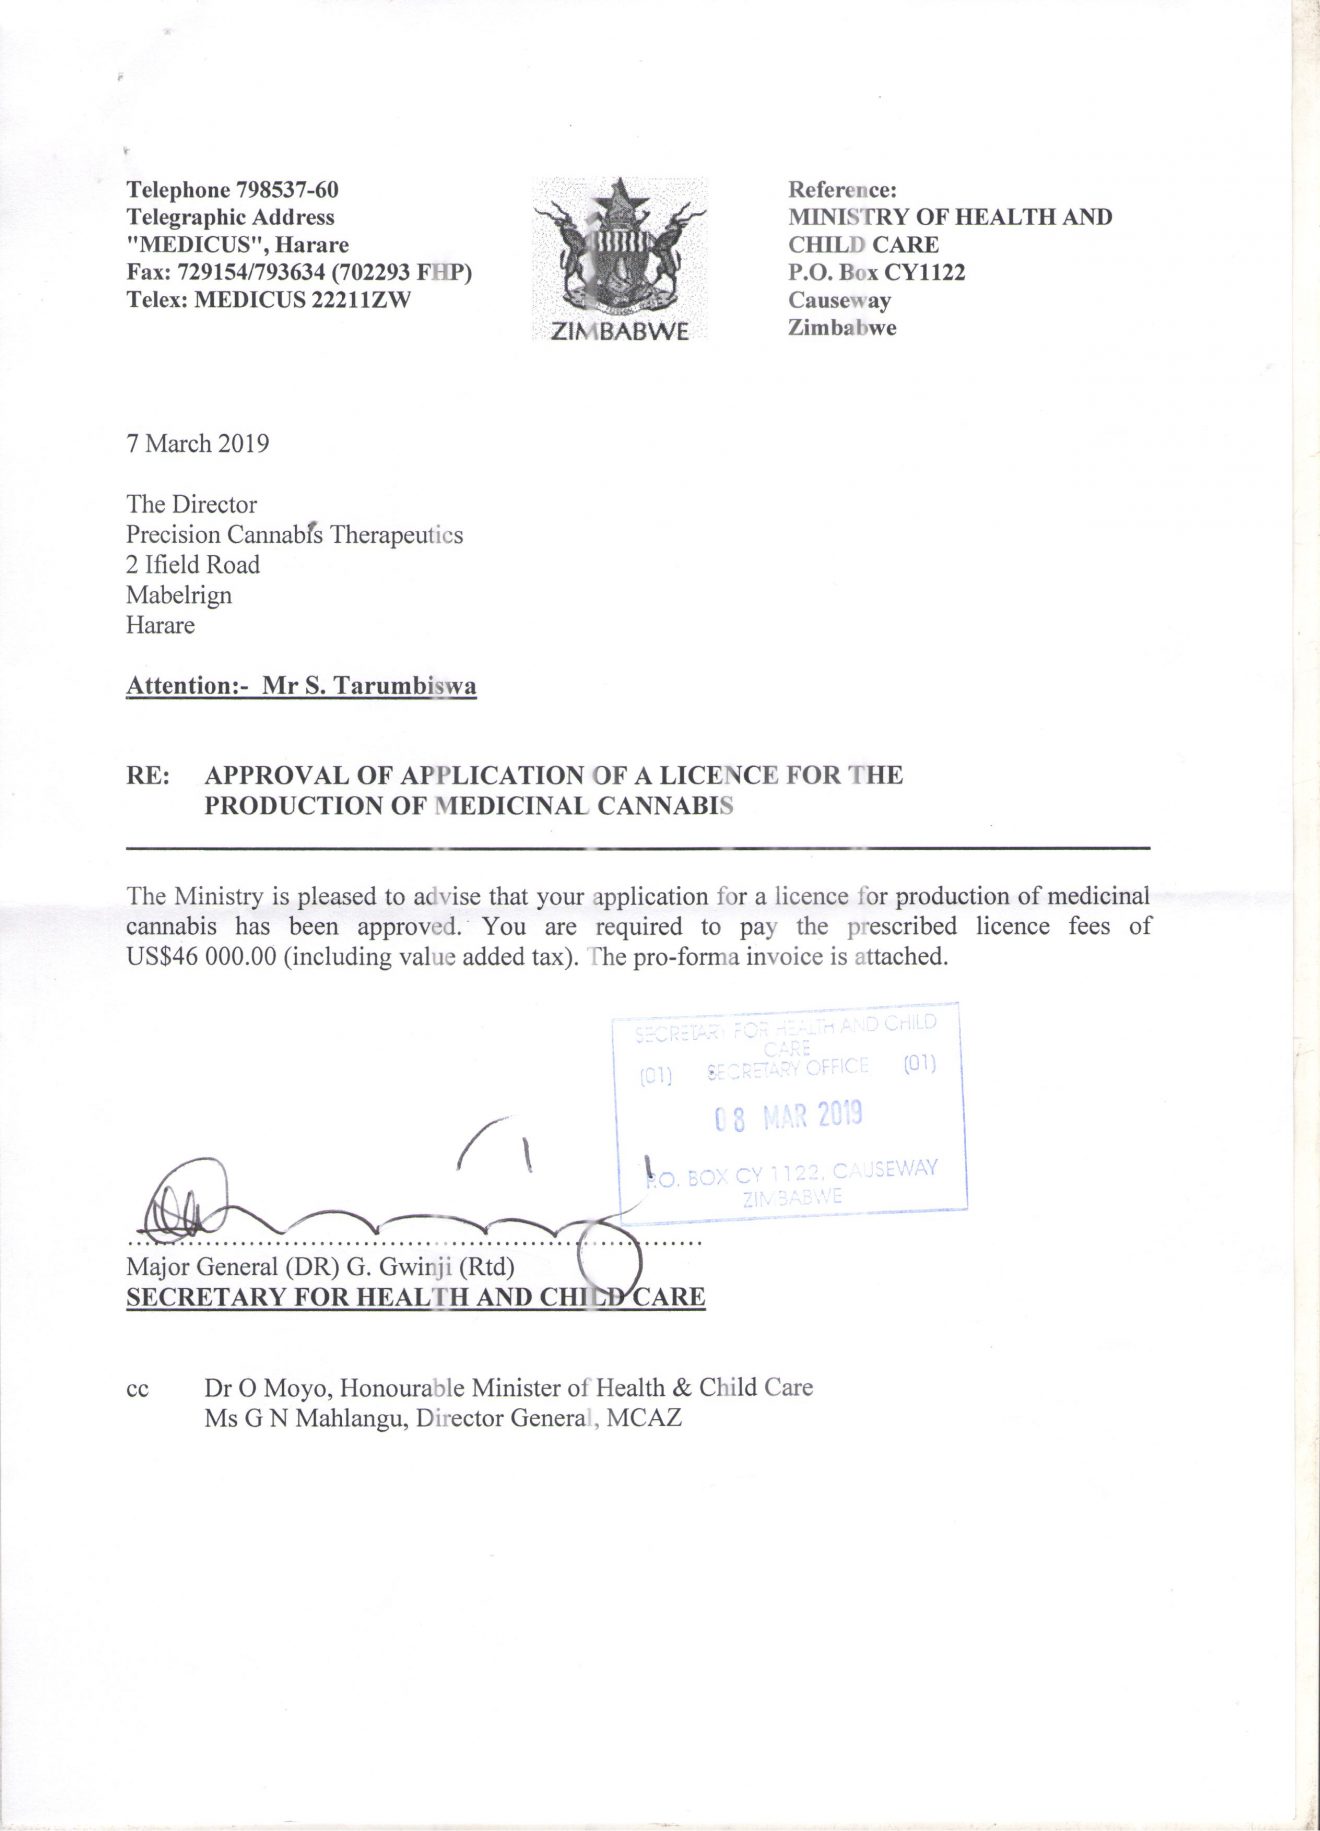 sample of an application letter in zimbabwe